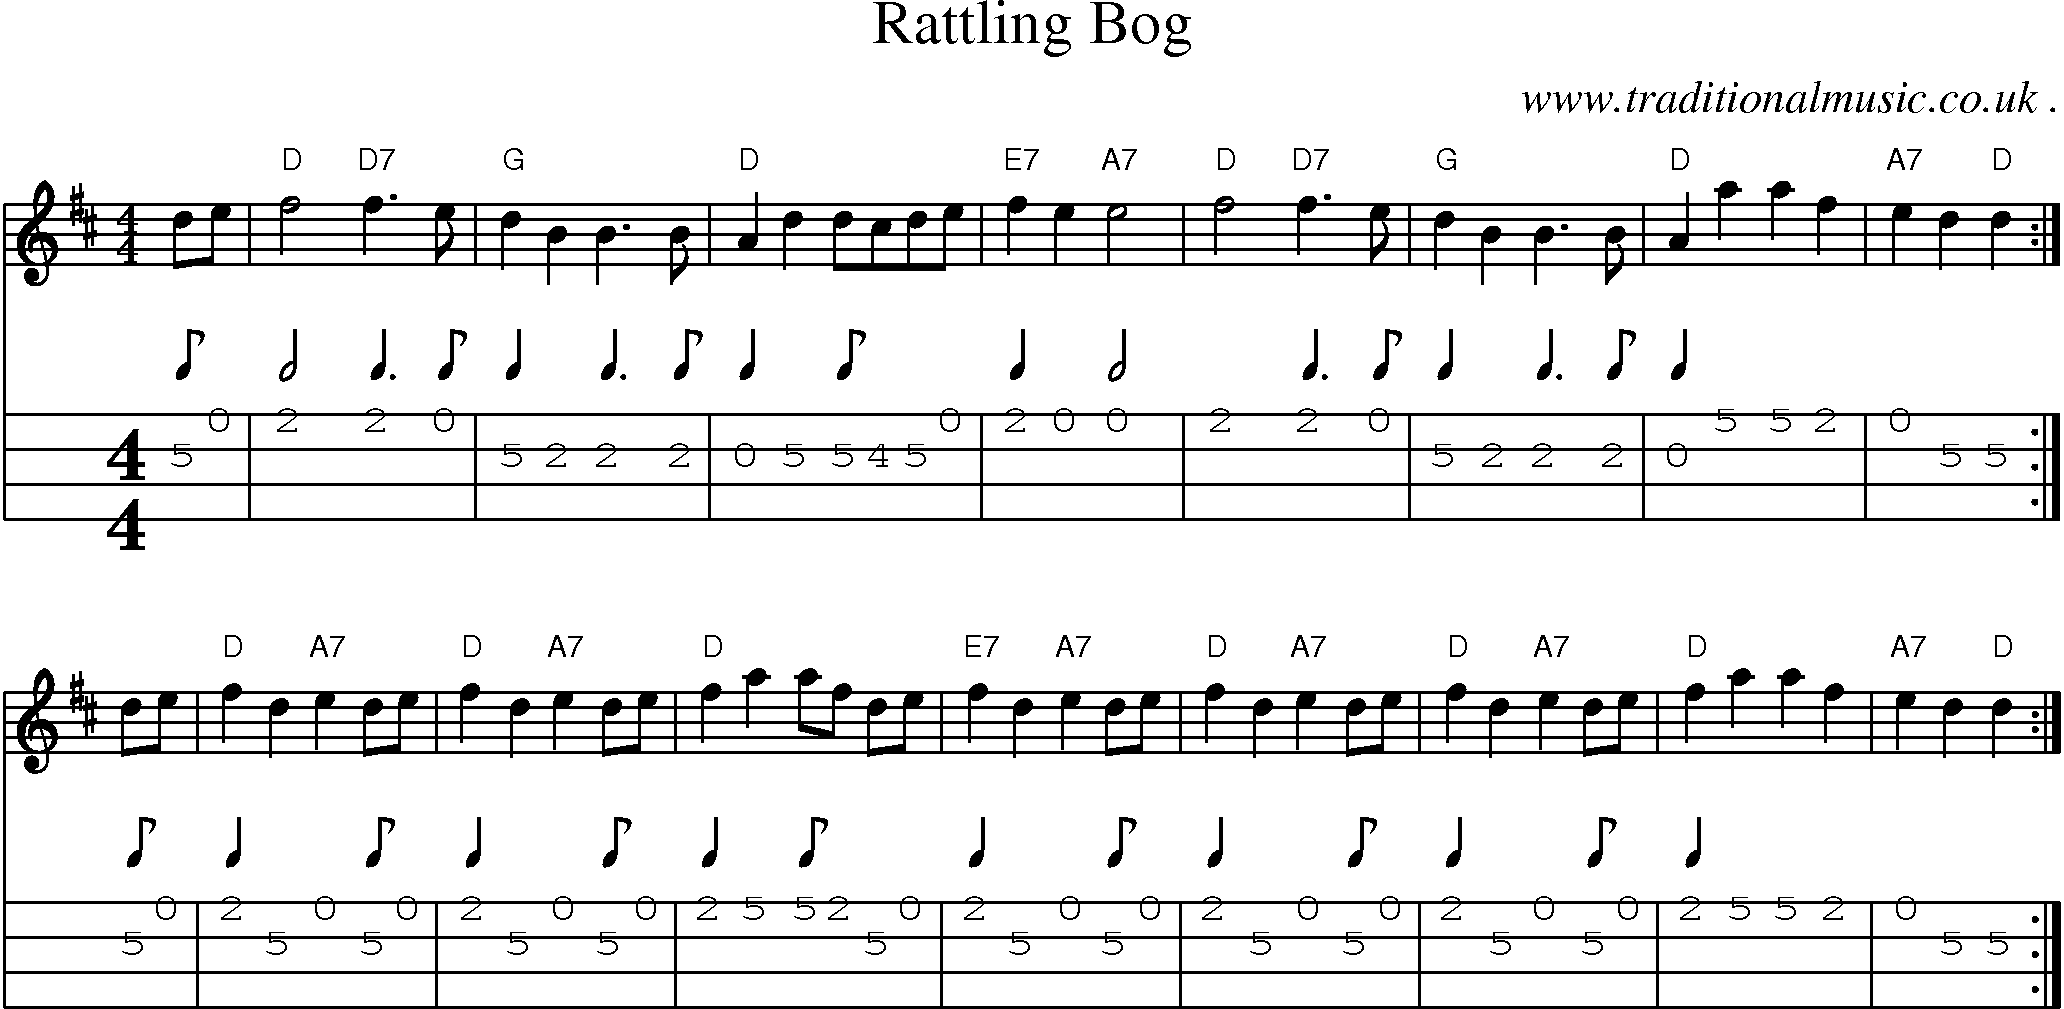 Music Score and Guitar Tabs for Rattling Bog